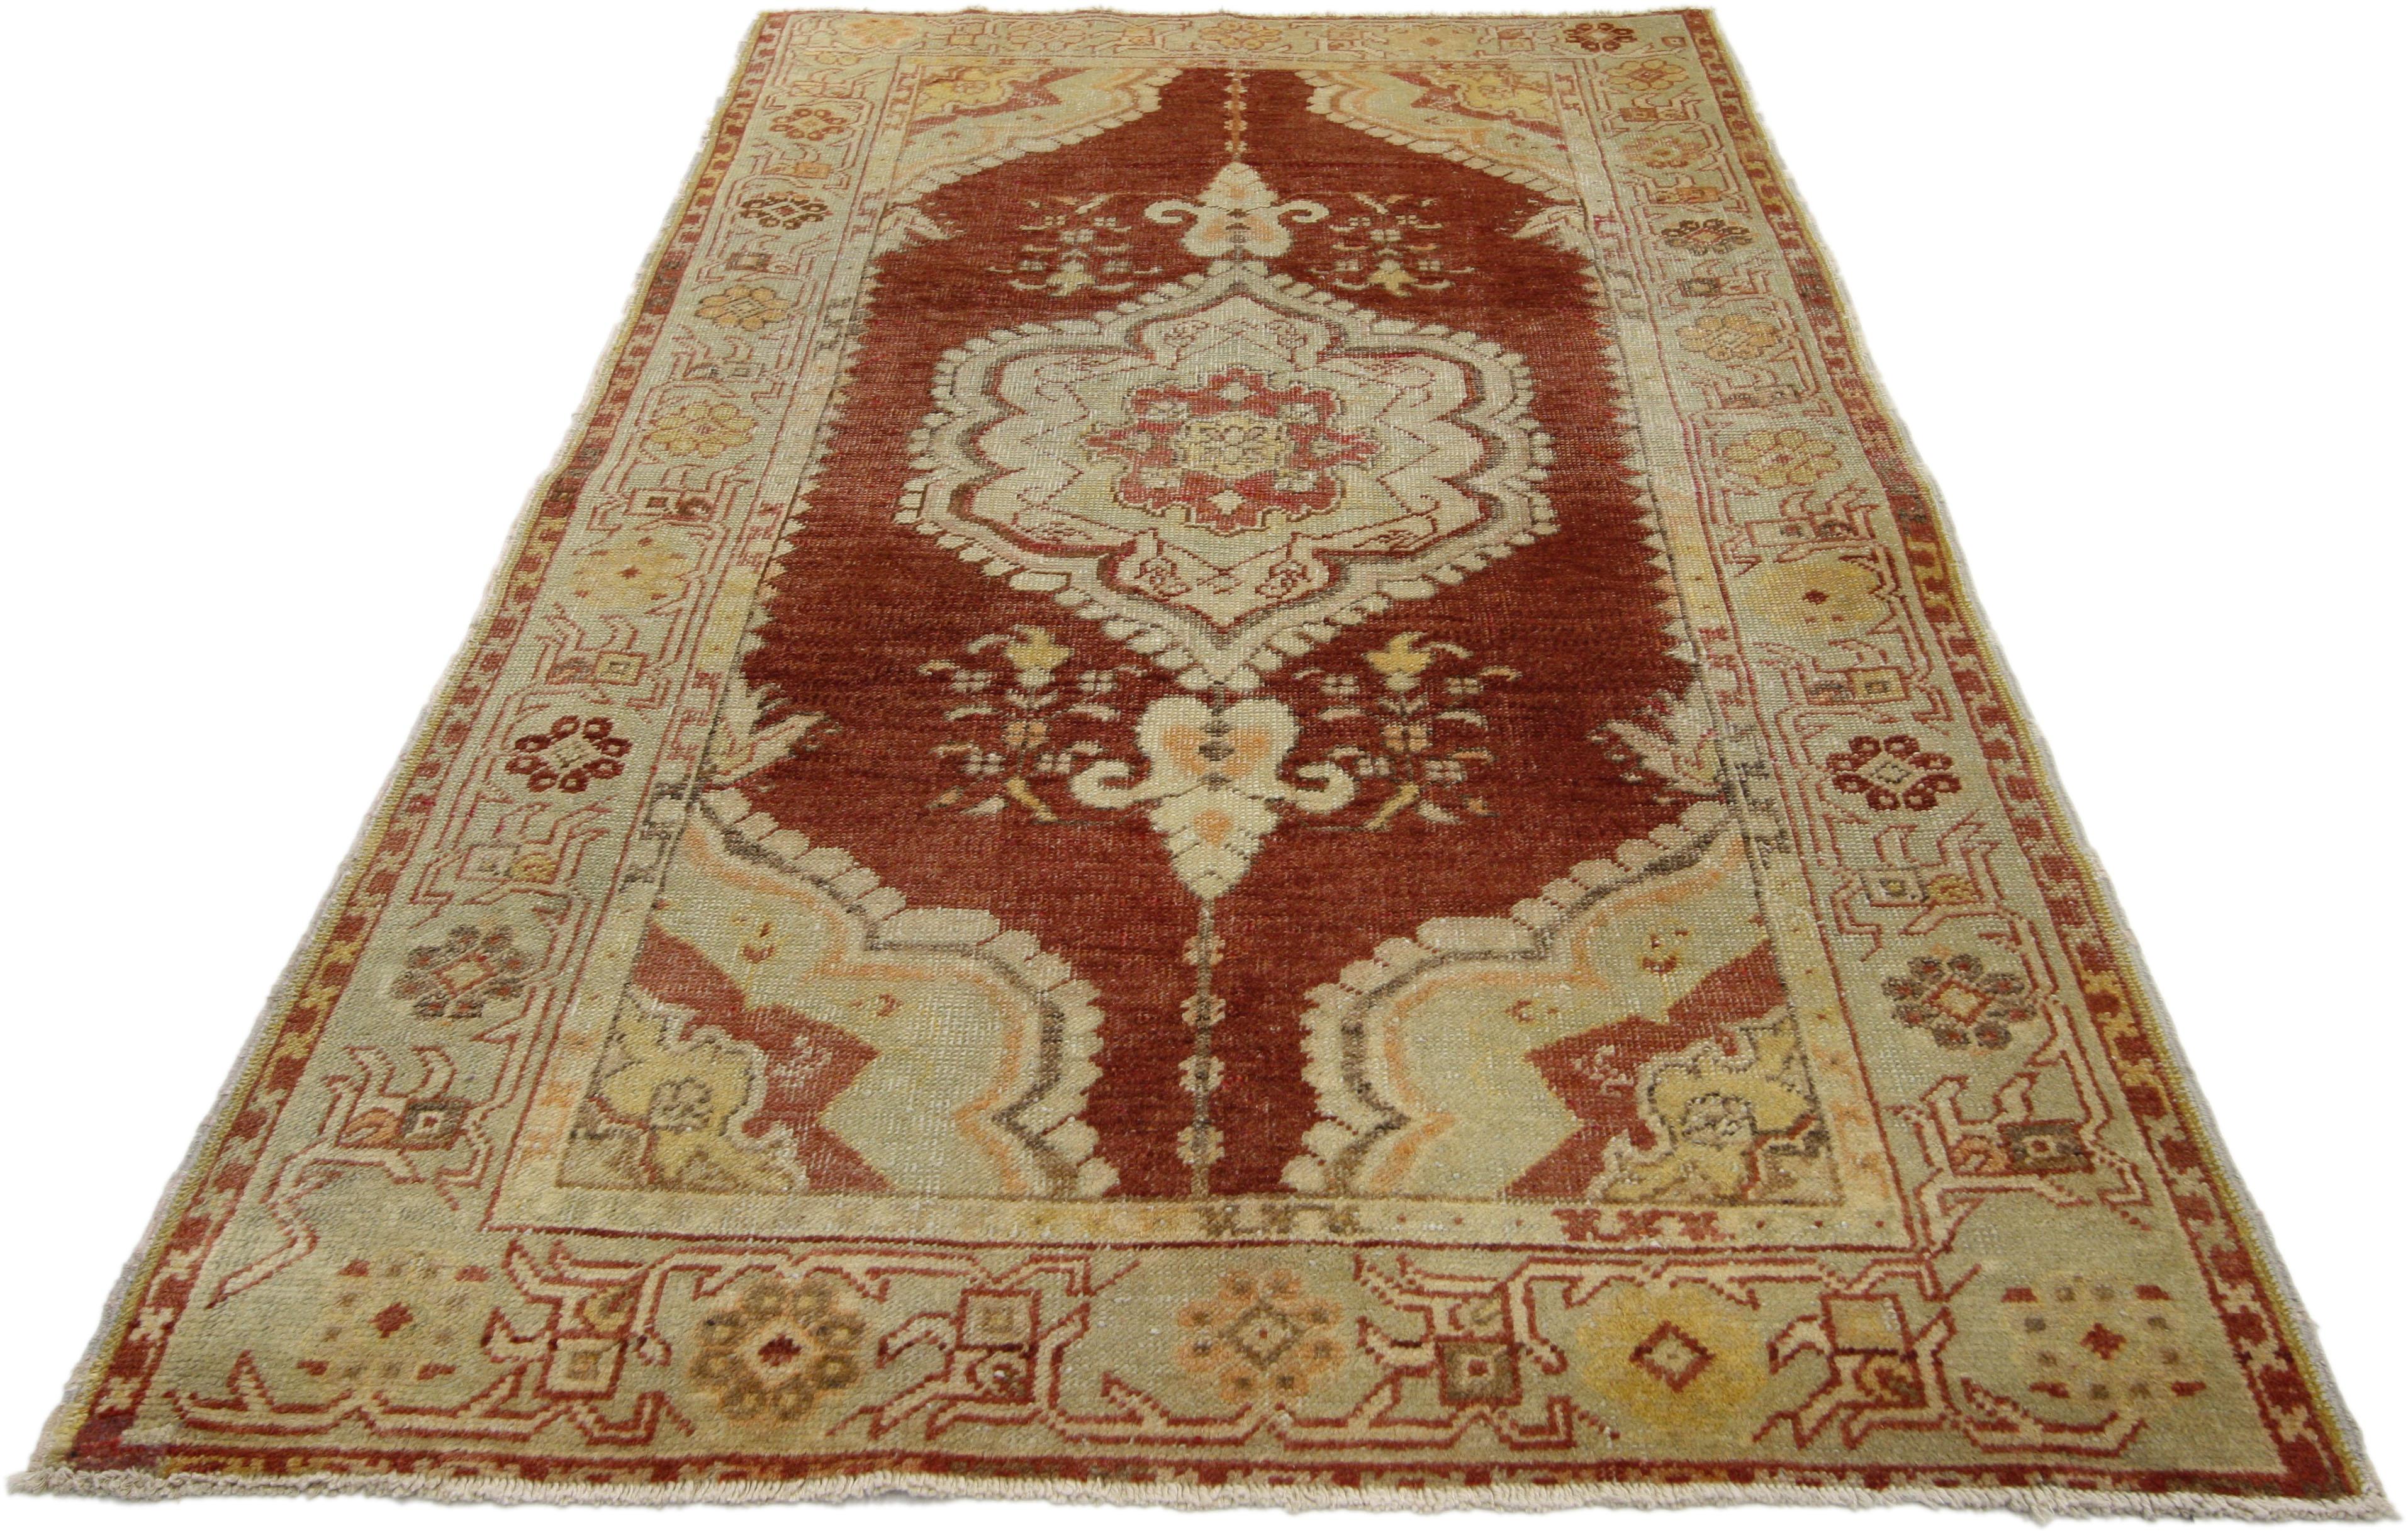 50636 Vintage Turkish Oushak Accent Rug with Modern Rustic Spanish Colonial Style 03'03 x 05'09. Warm and inviting, this hand-knotted vintage Turkish Oushak rug beautifully embodies a modern rustic style. It features a central medallion centered